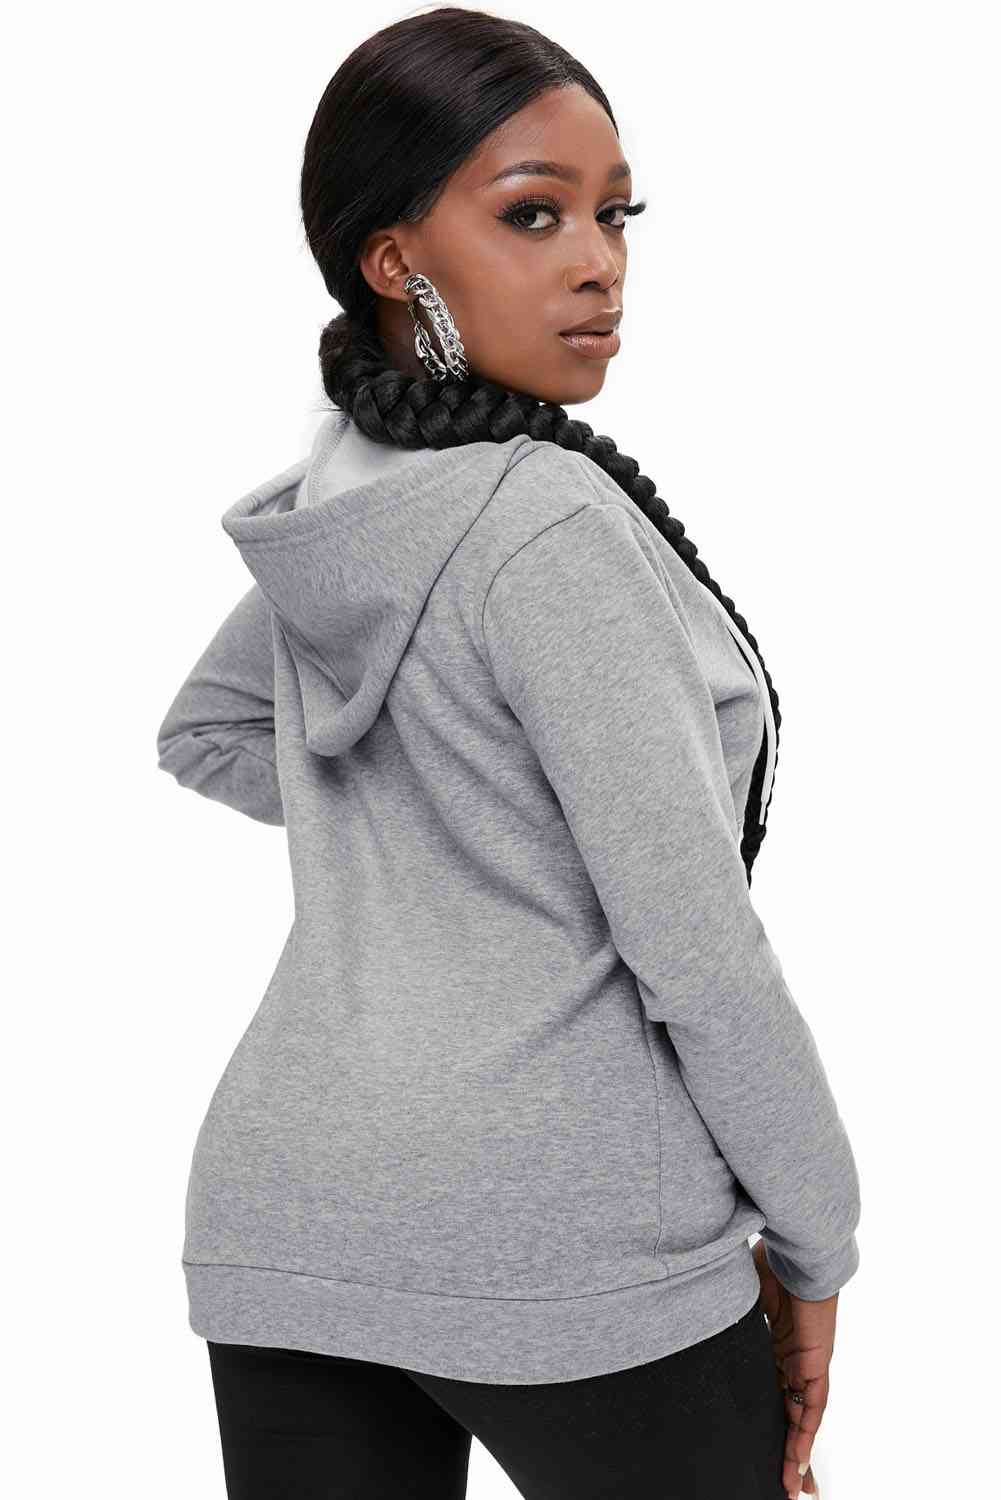 Half-Zip Drawstring Hoodie with Pockets | CLOTHING,SHOES & ACCESSORIES | hoodies, pocketed hoodies, Ship From Overseas, SYNZ | Trendsi